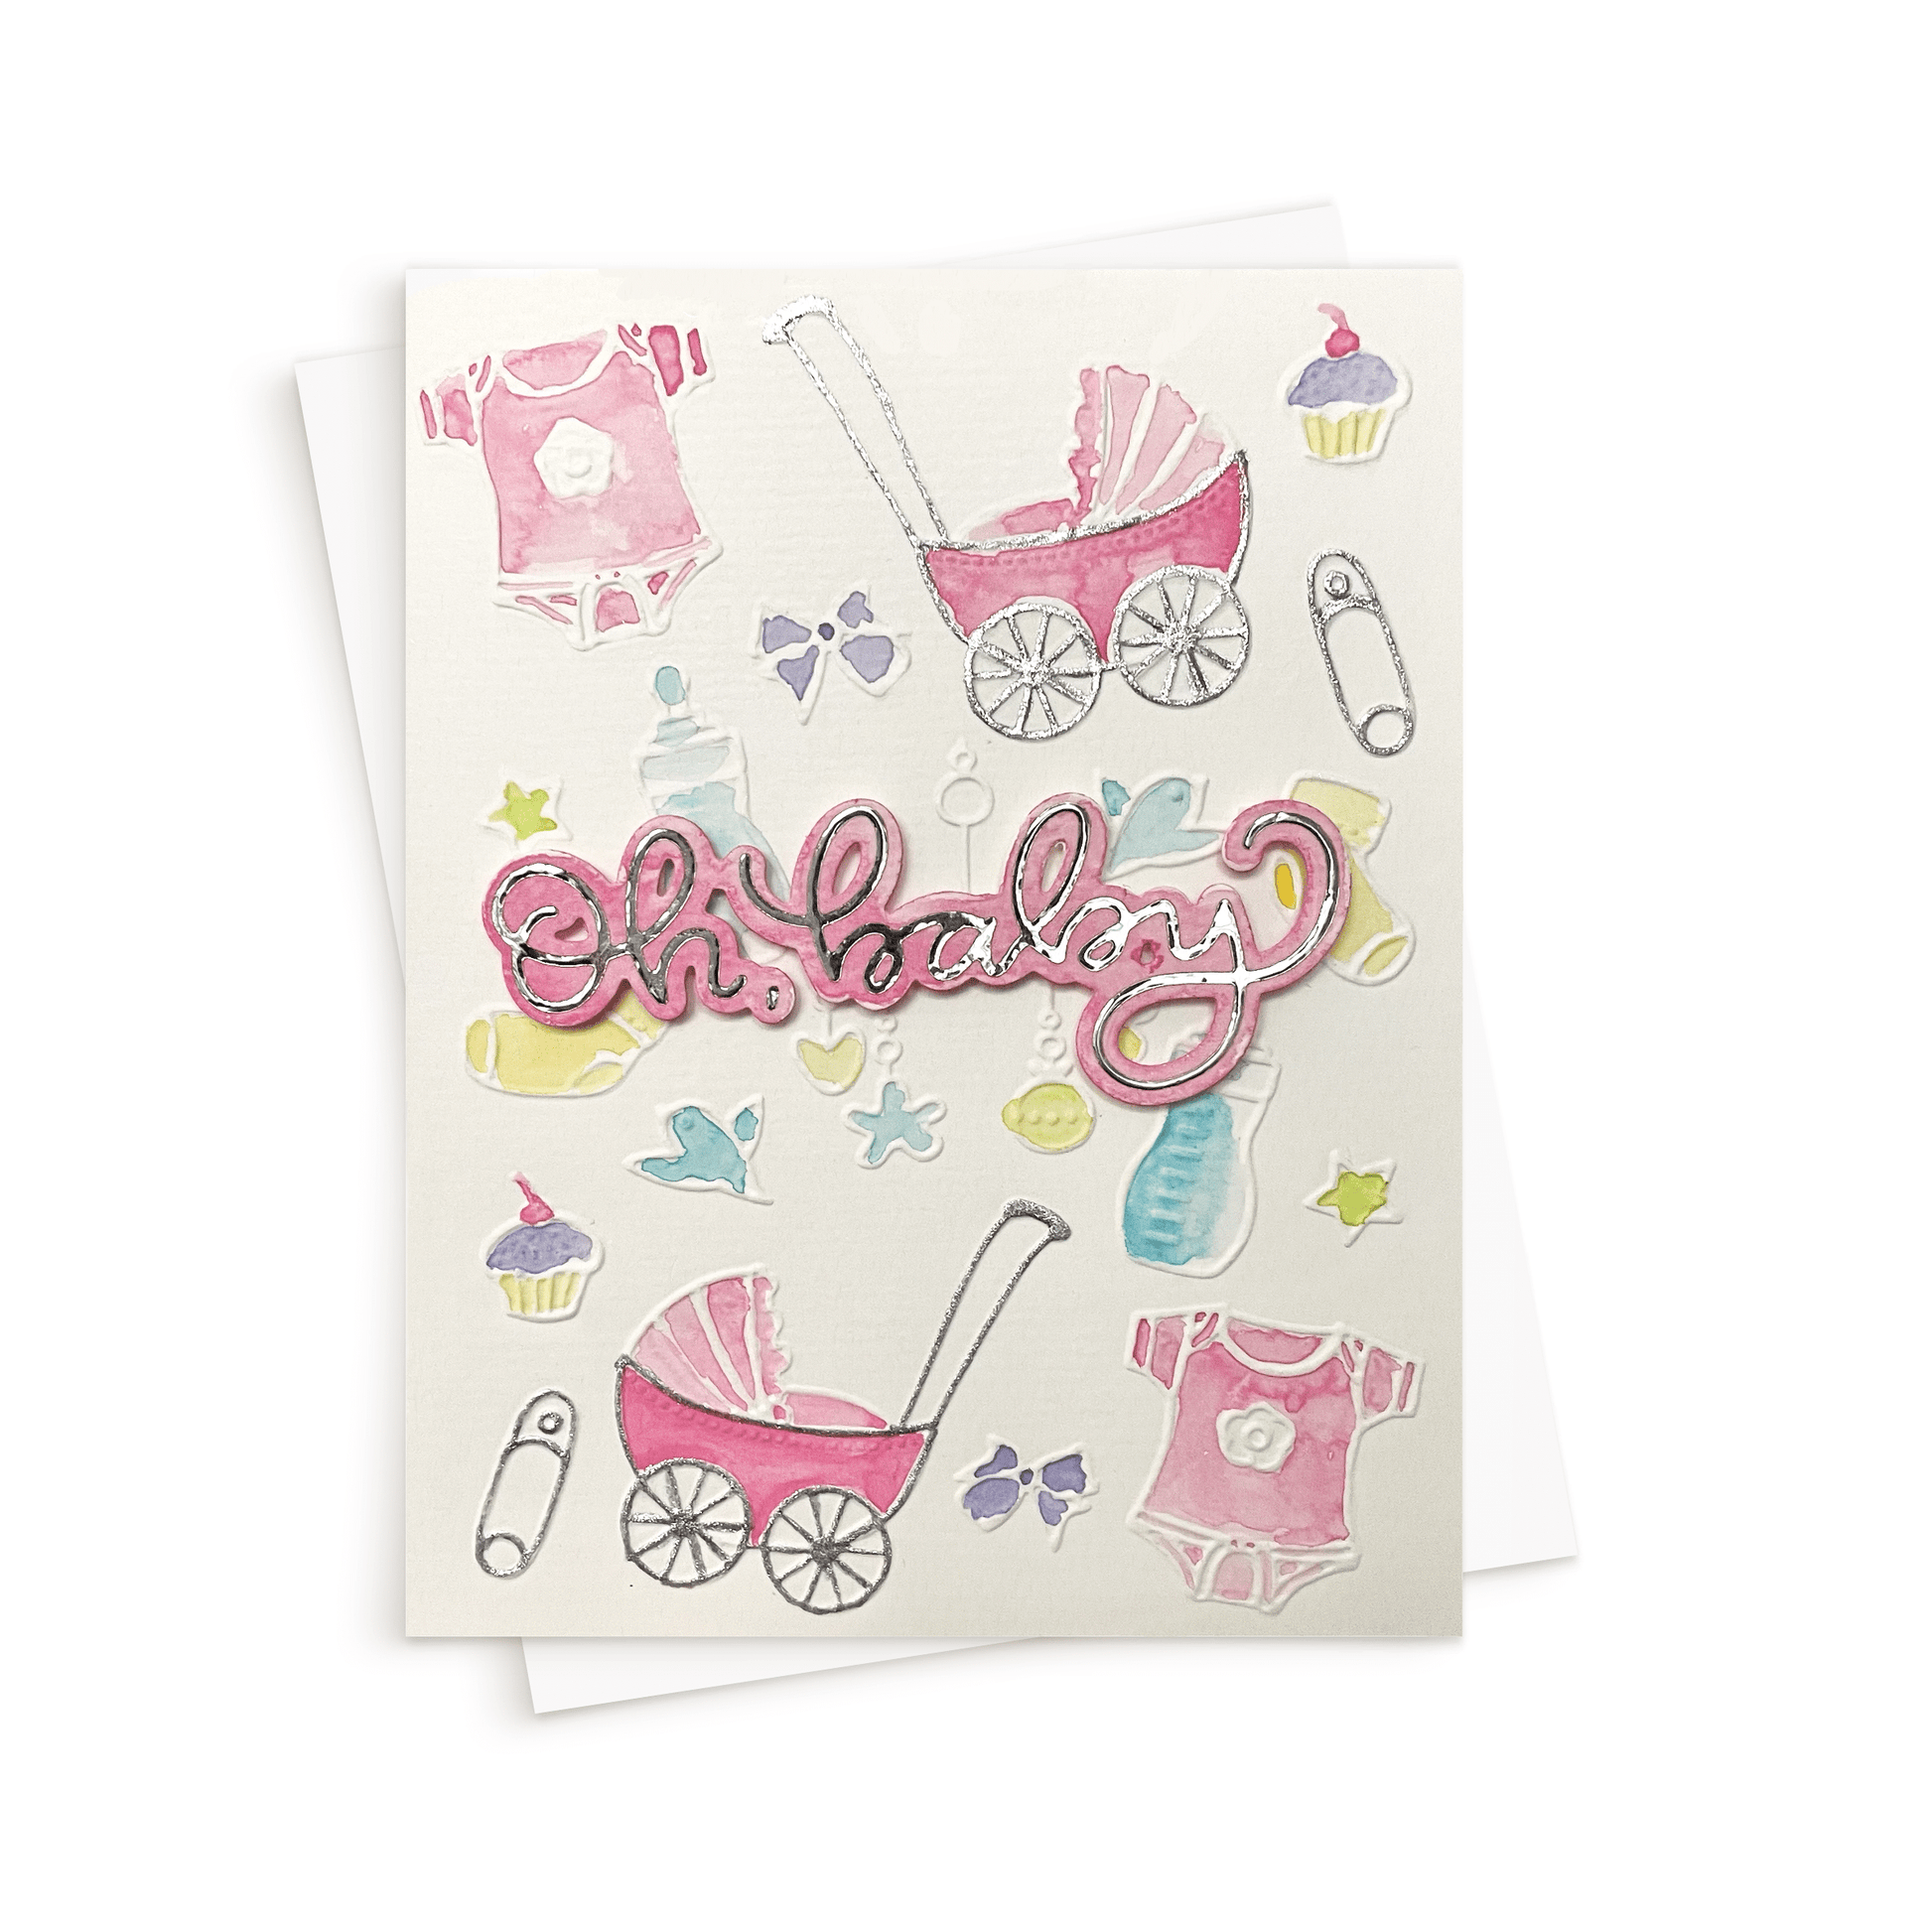 Oh baby, baby shower card in pink. Card for a new baby.